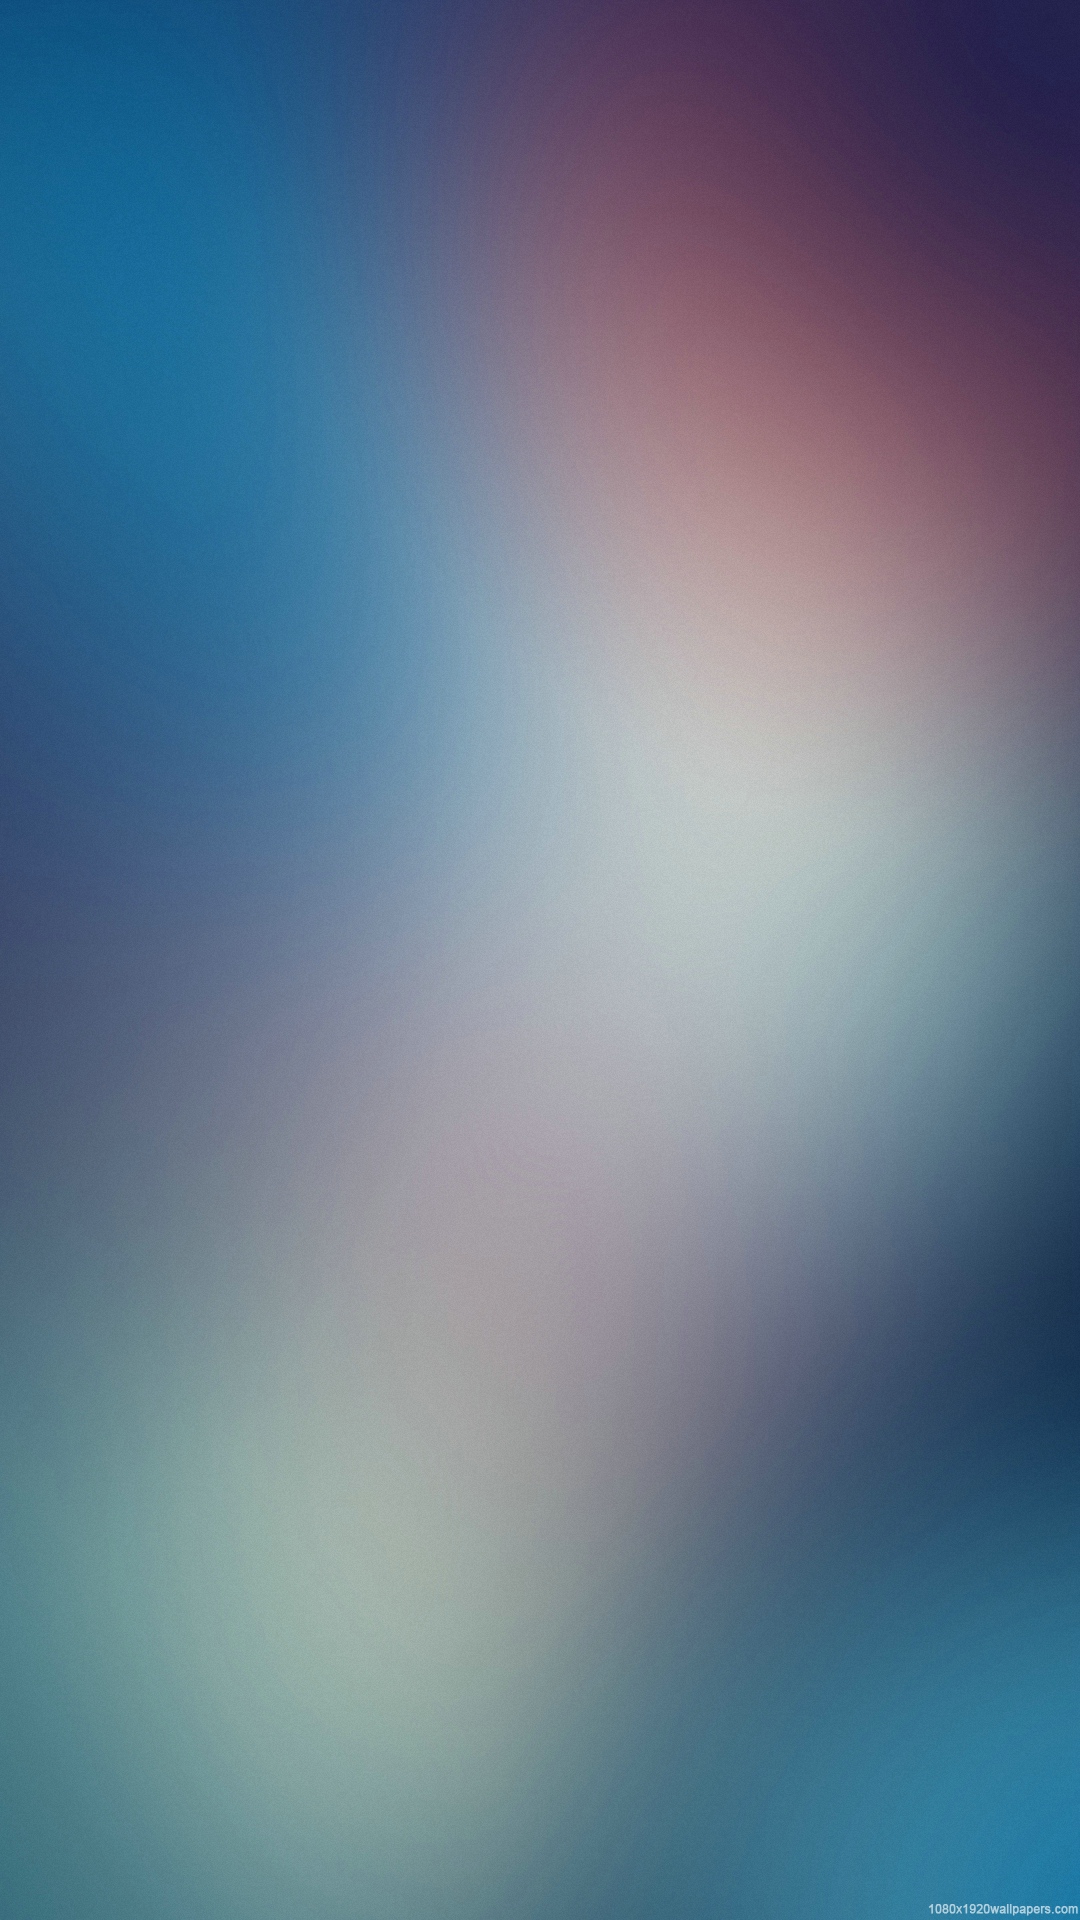 Hazy Simple Wallpaper HD Wallpaper For Android Wallpaper & Background Download